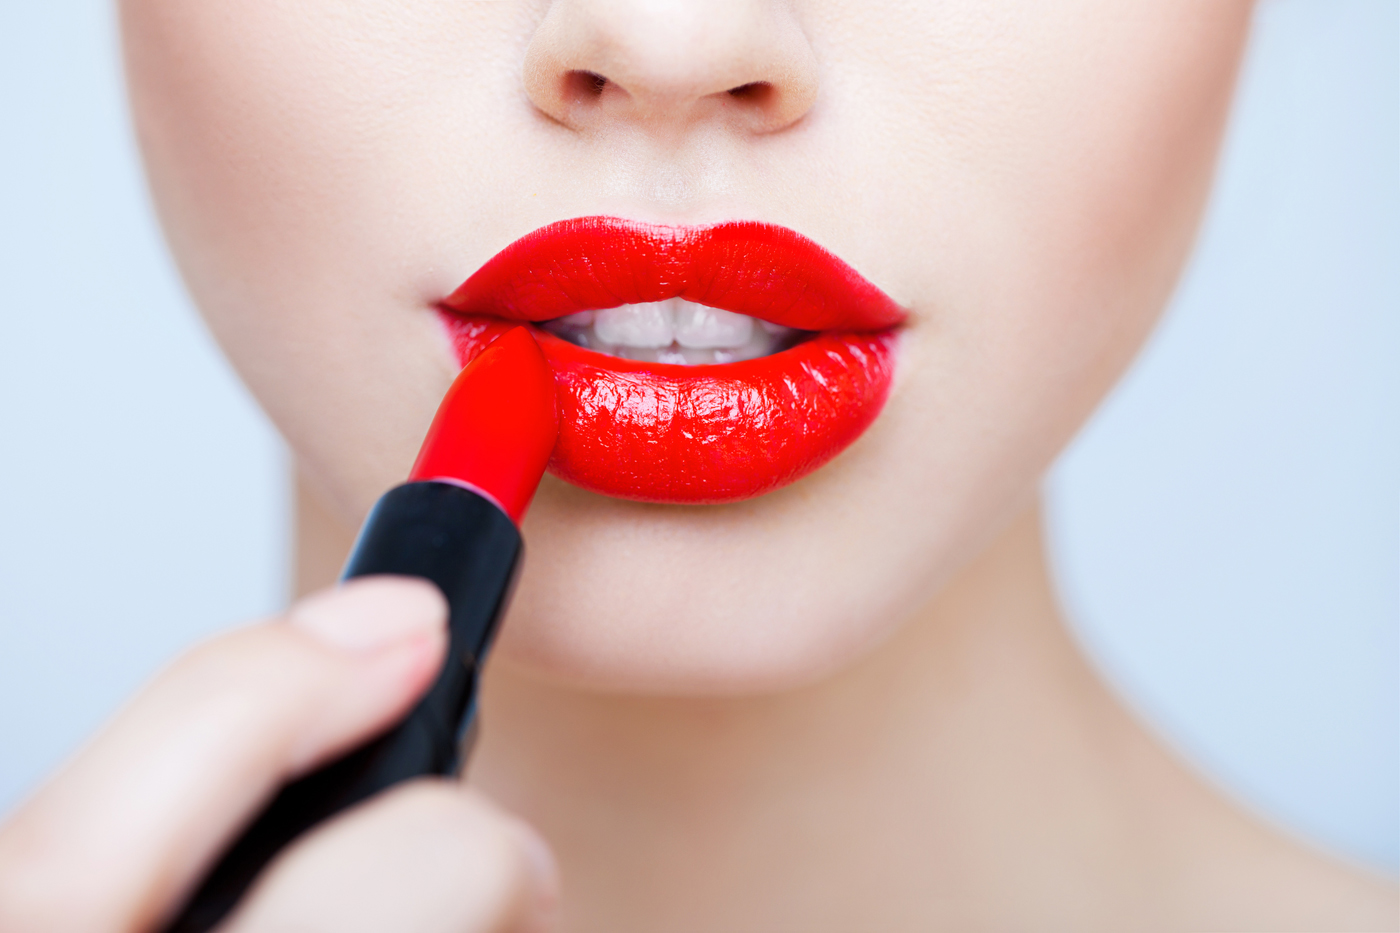 Most lipstick contains fish scales.